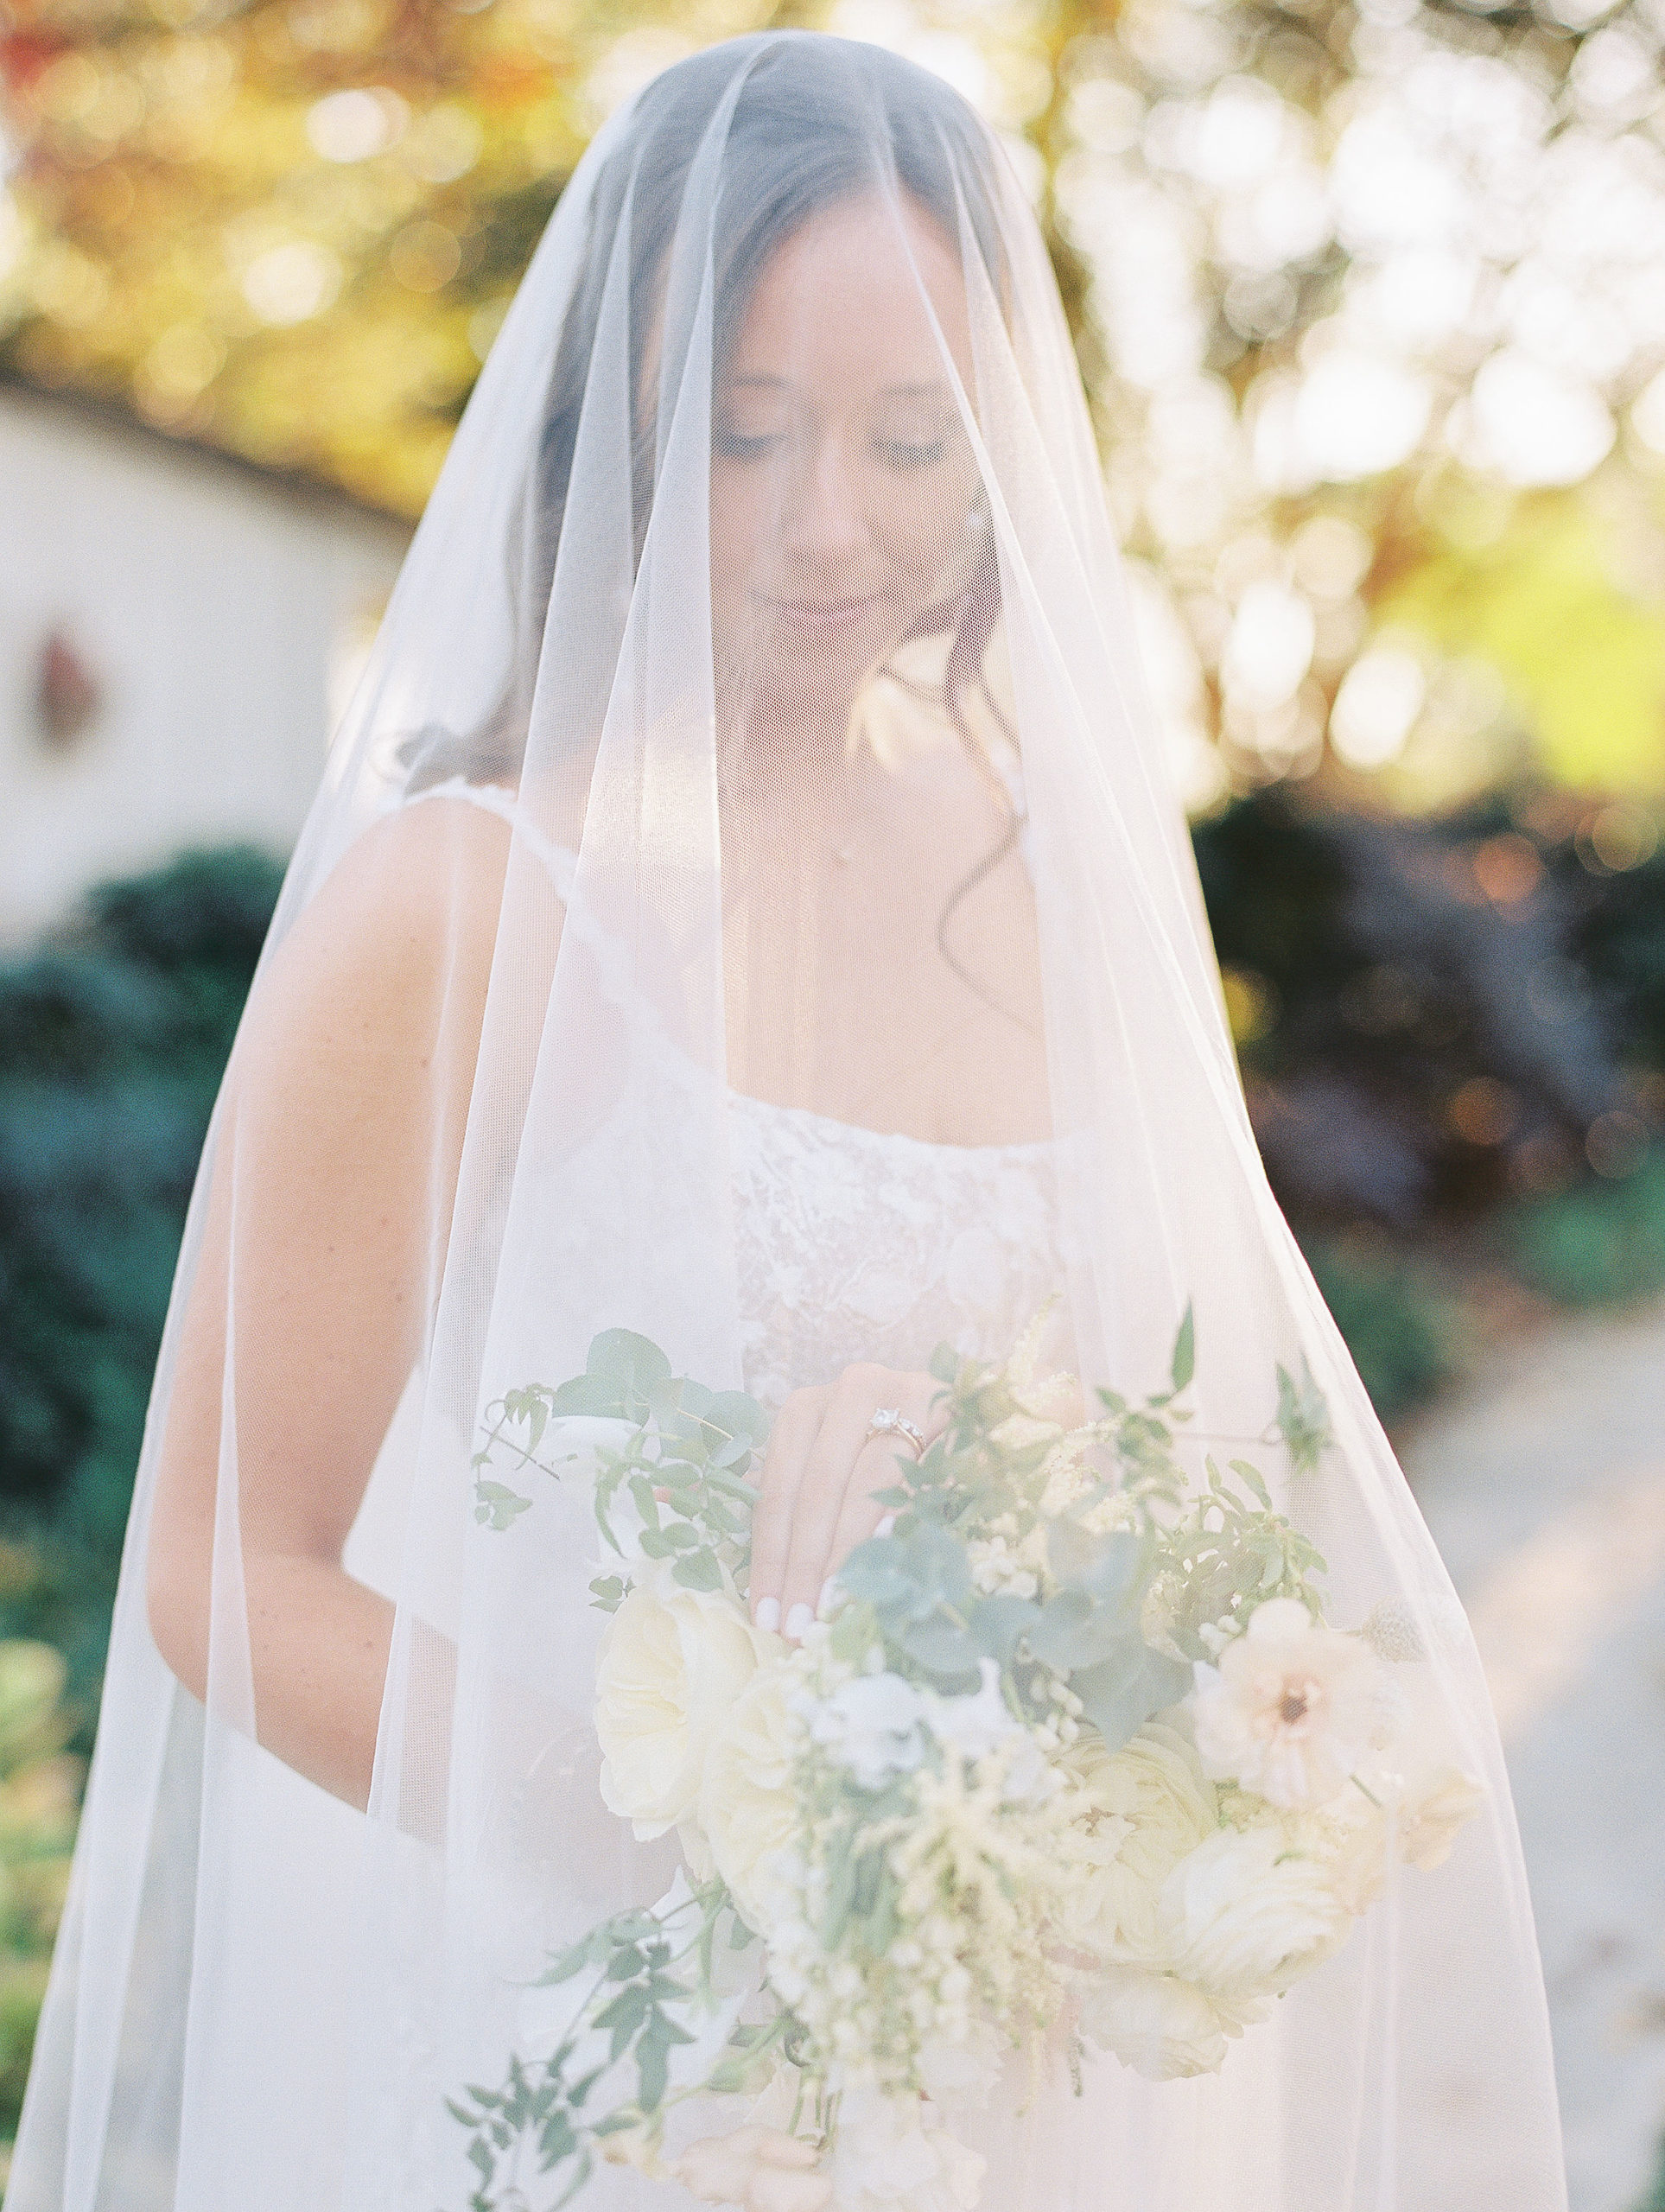 Bride holds bouquet and looks down with veil over head for Clifton wedding photography